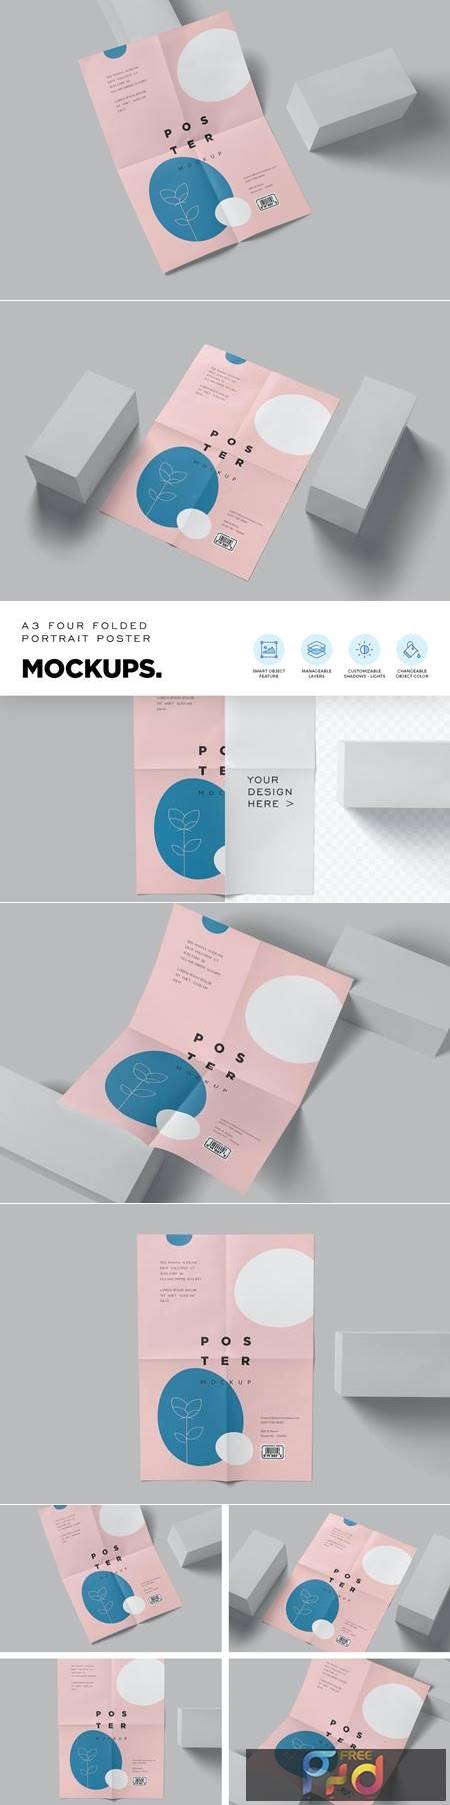 A3 Size 4 Folded Poster Mockups 2BJCFW8 1